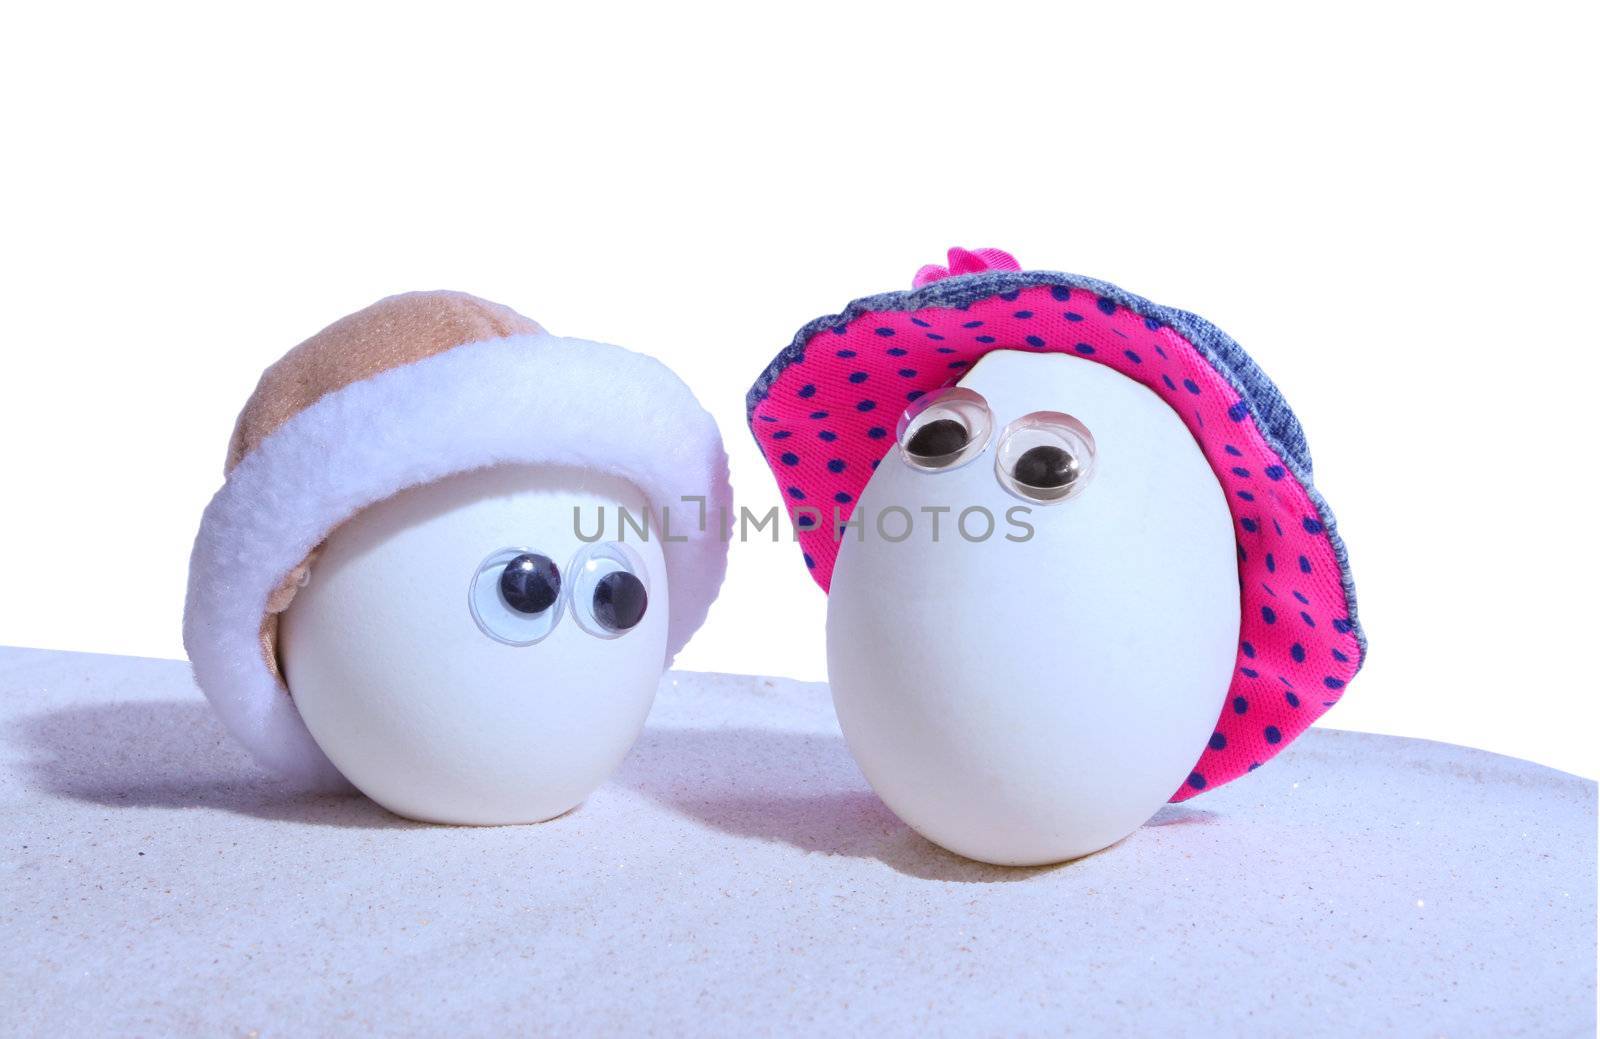 Two hardboiled eggs with eyeballs and hats, add your own expressions,